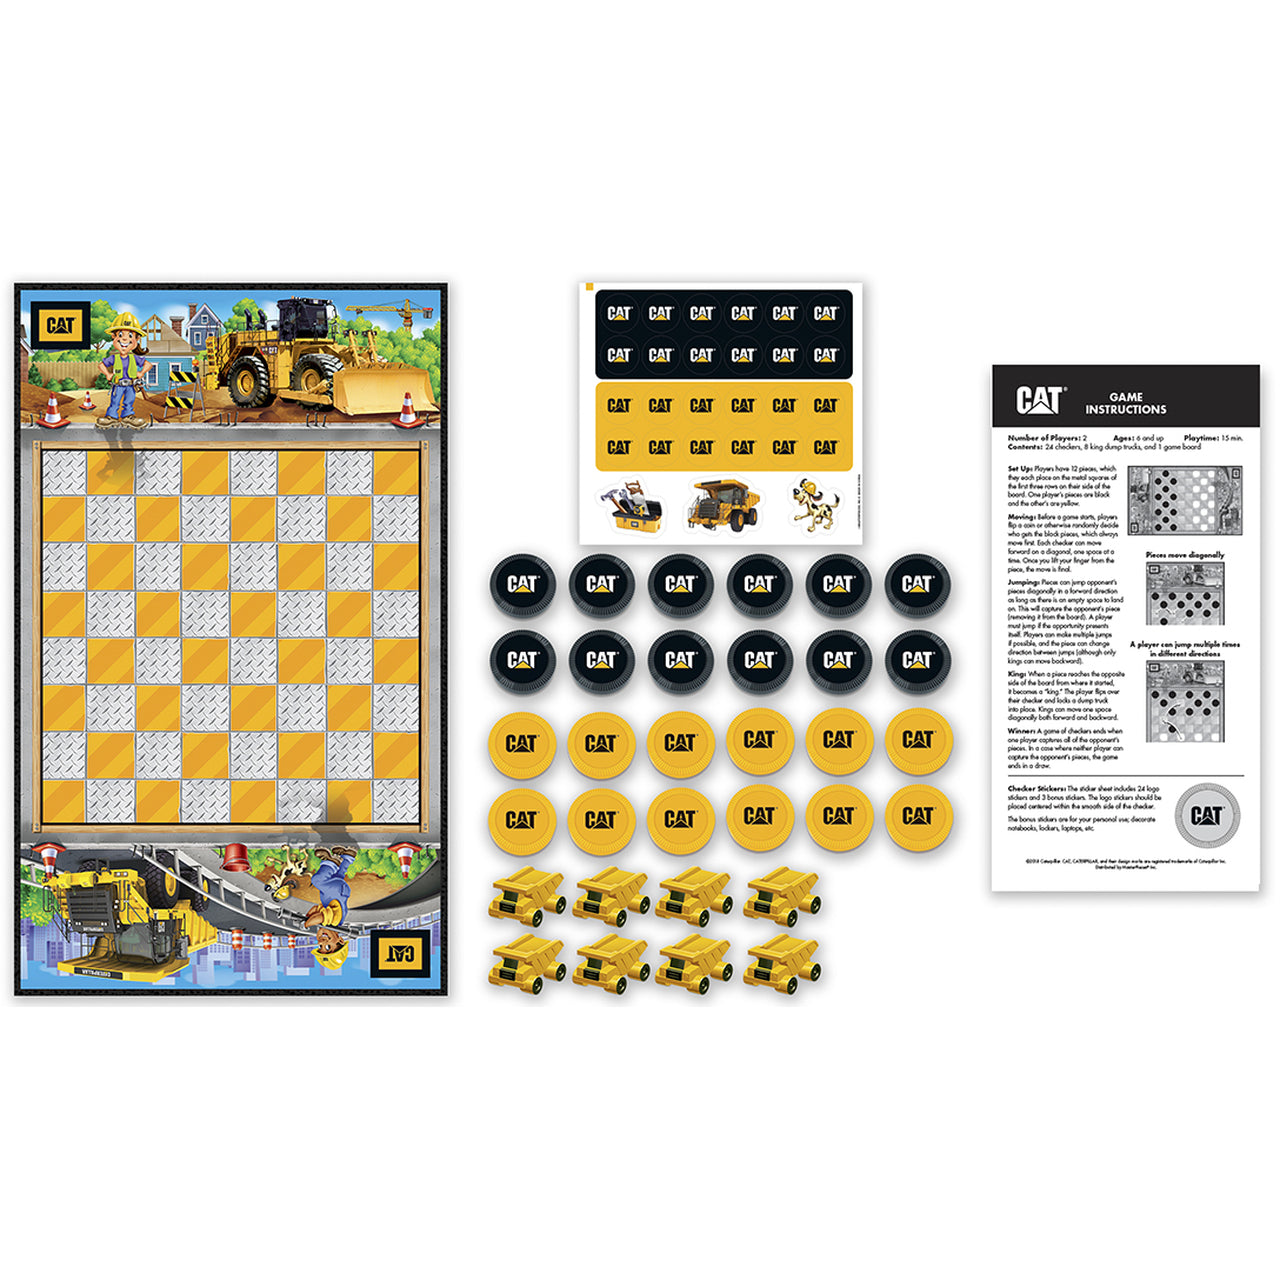 Caterpillar Checkers Board Game by Masterpieces